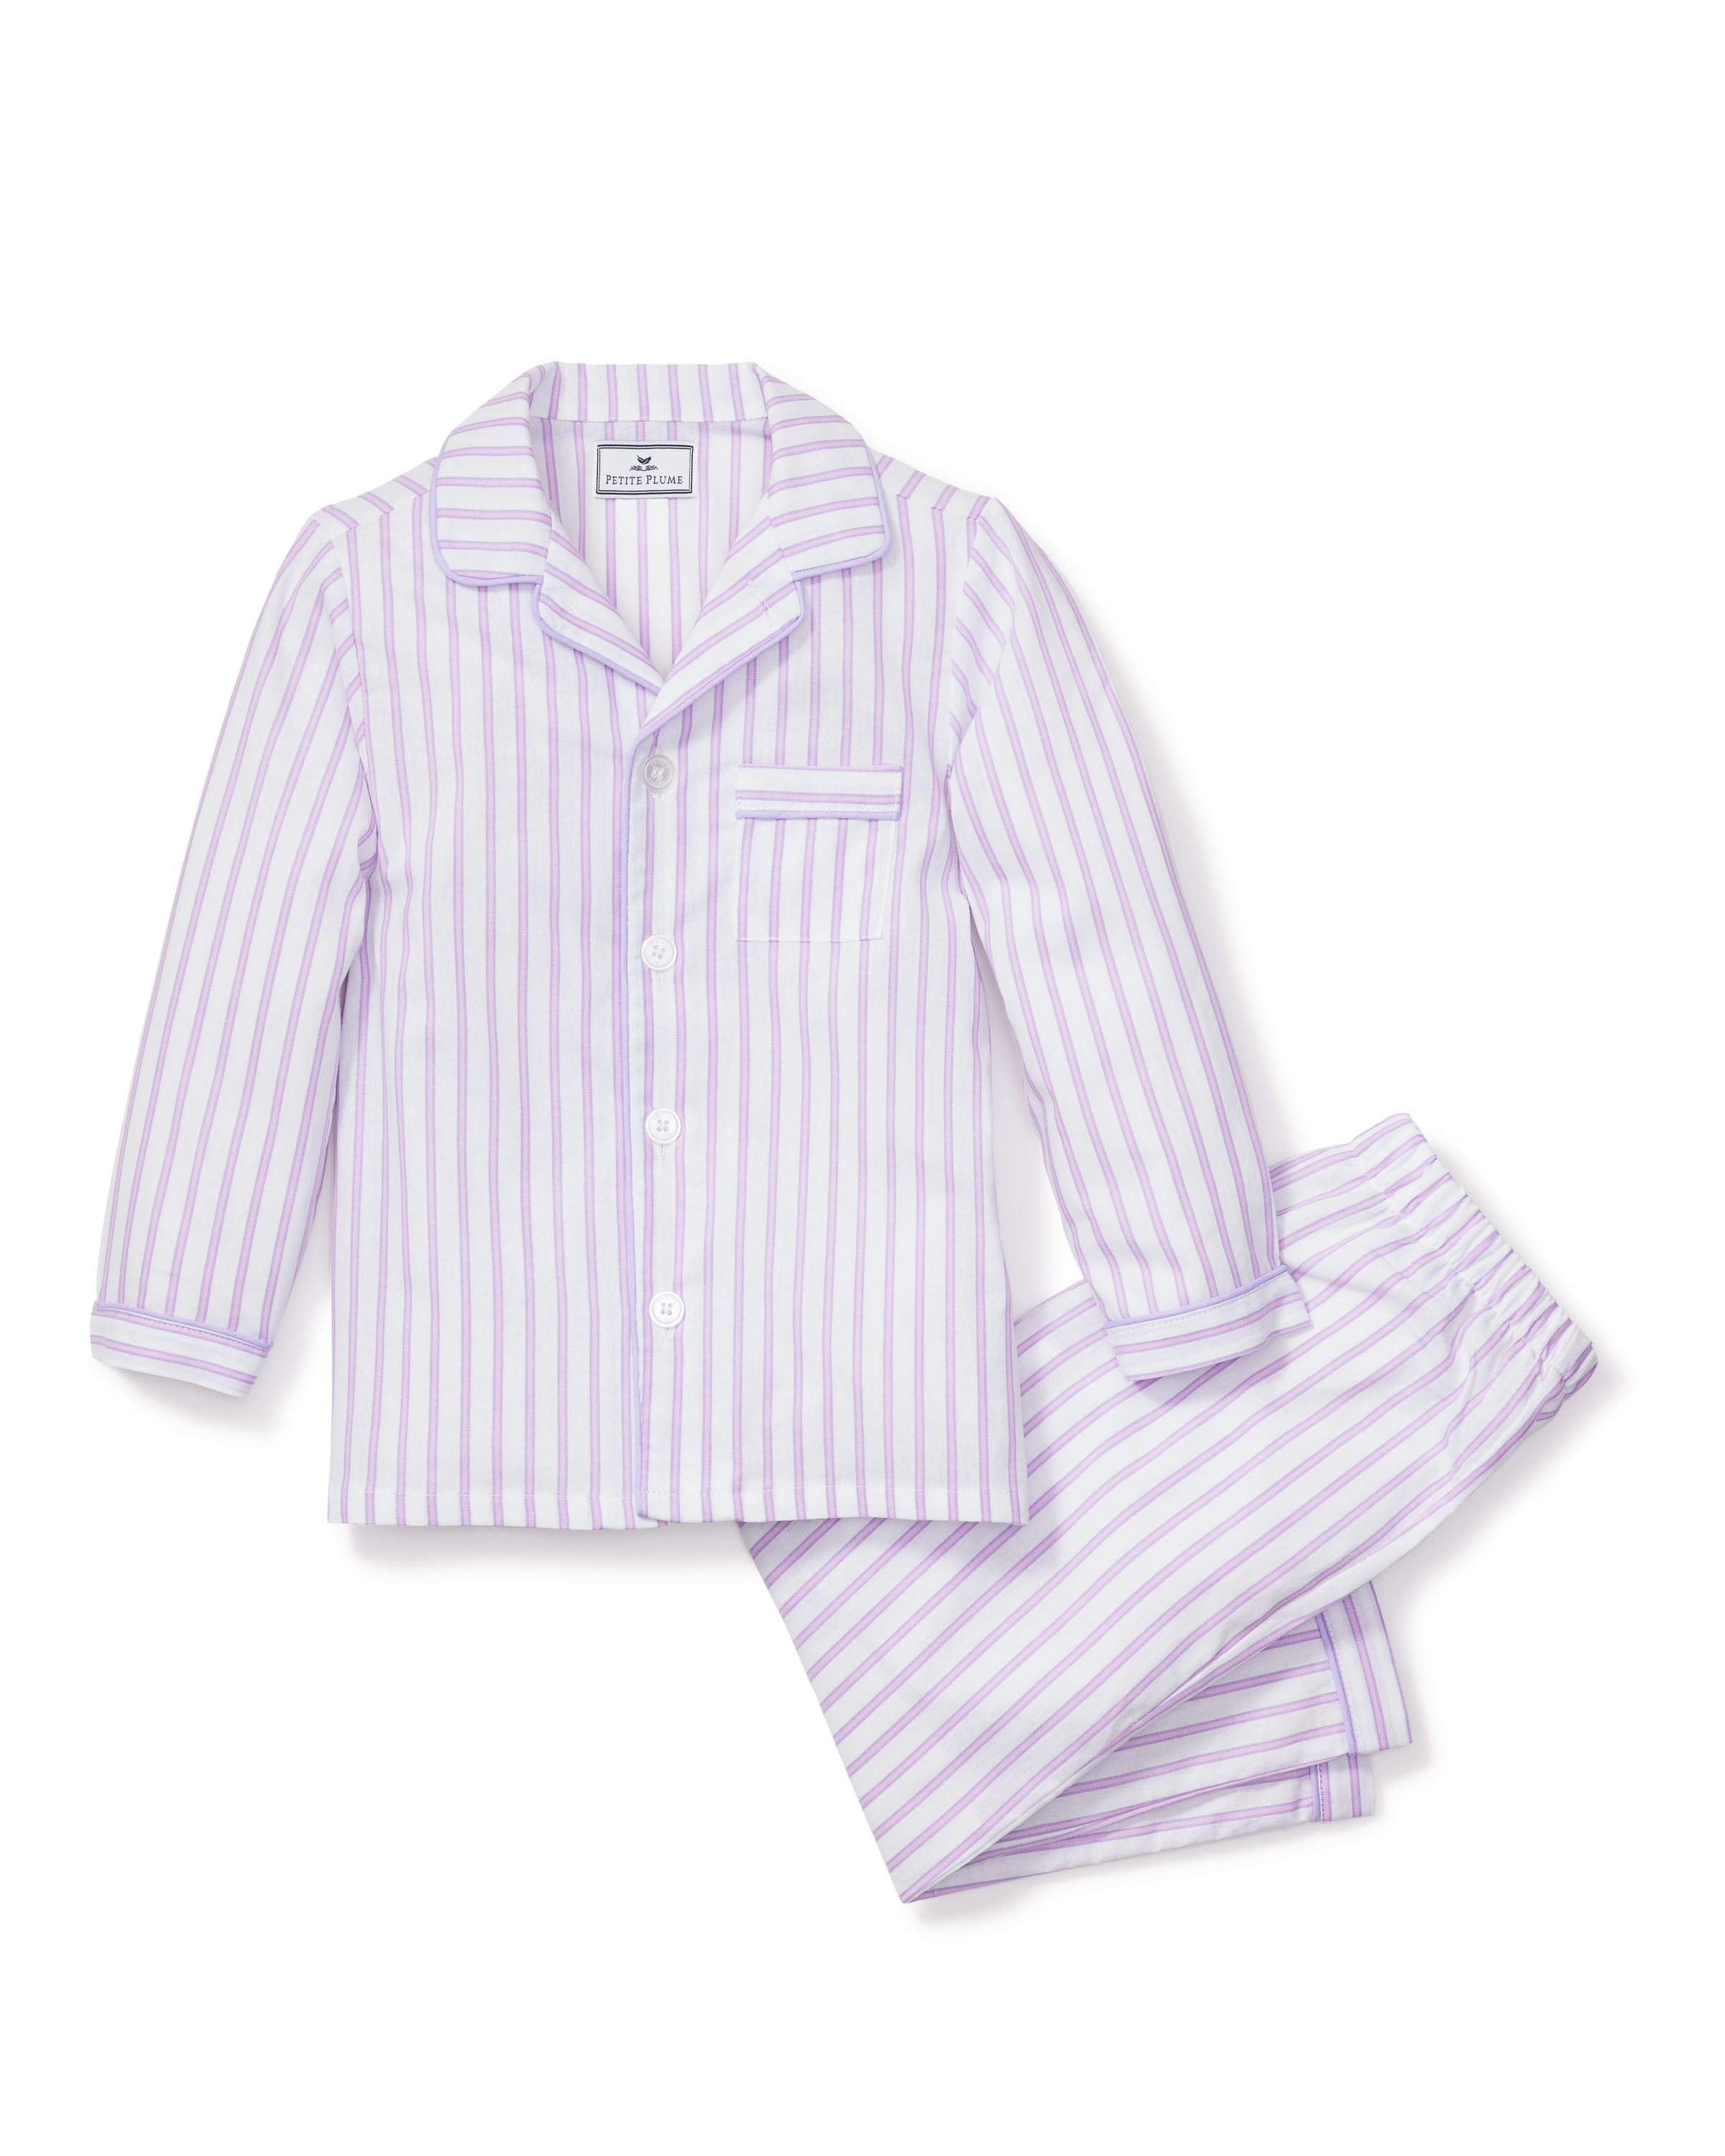 Kid's Twill Pajama Set in Lavender French Ticking